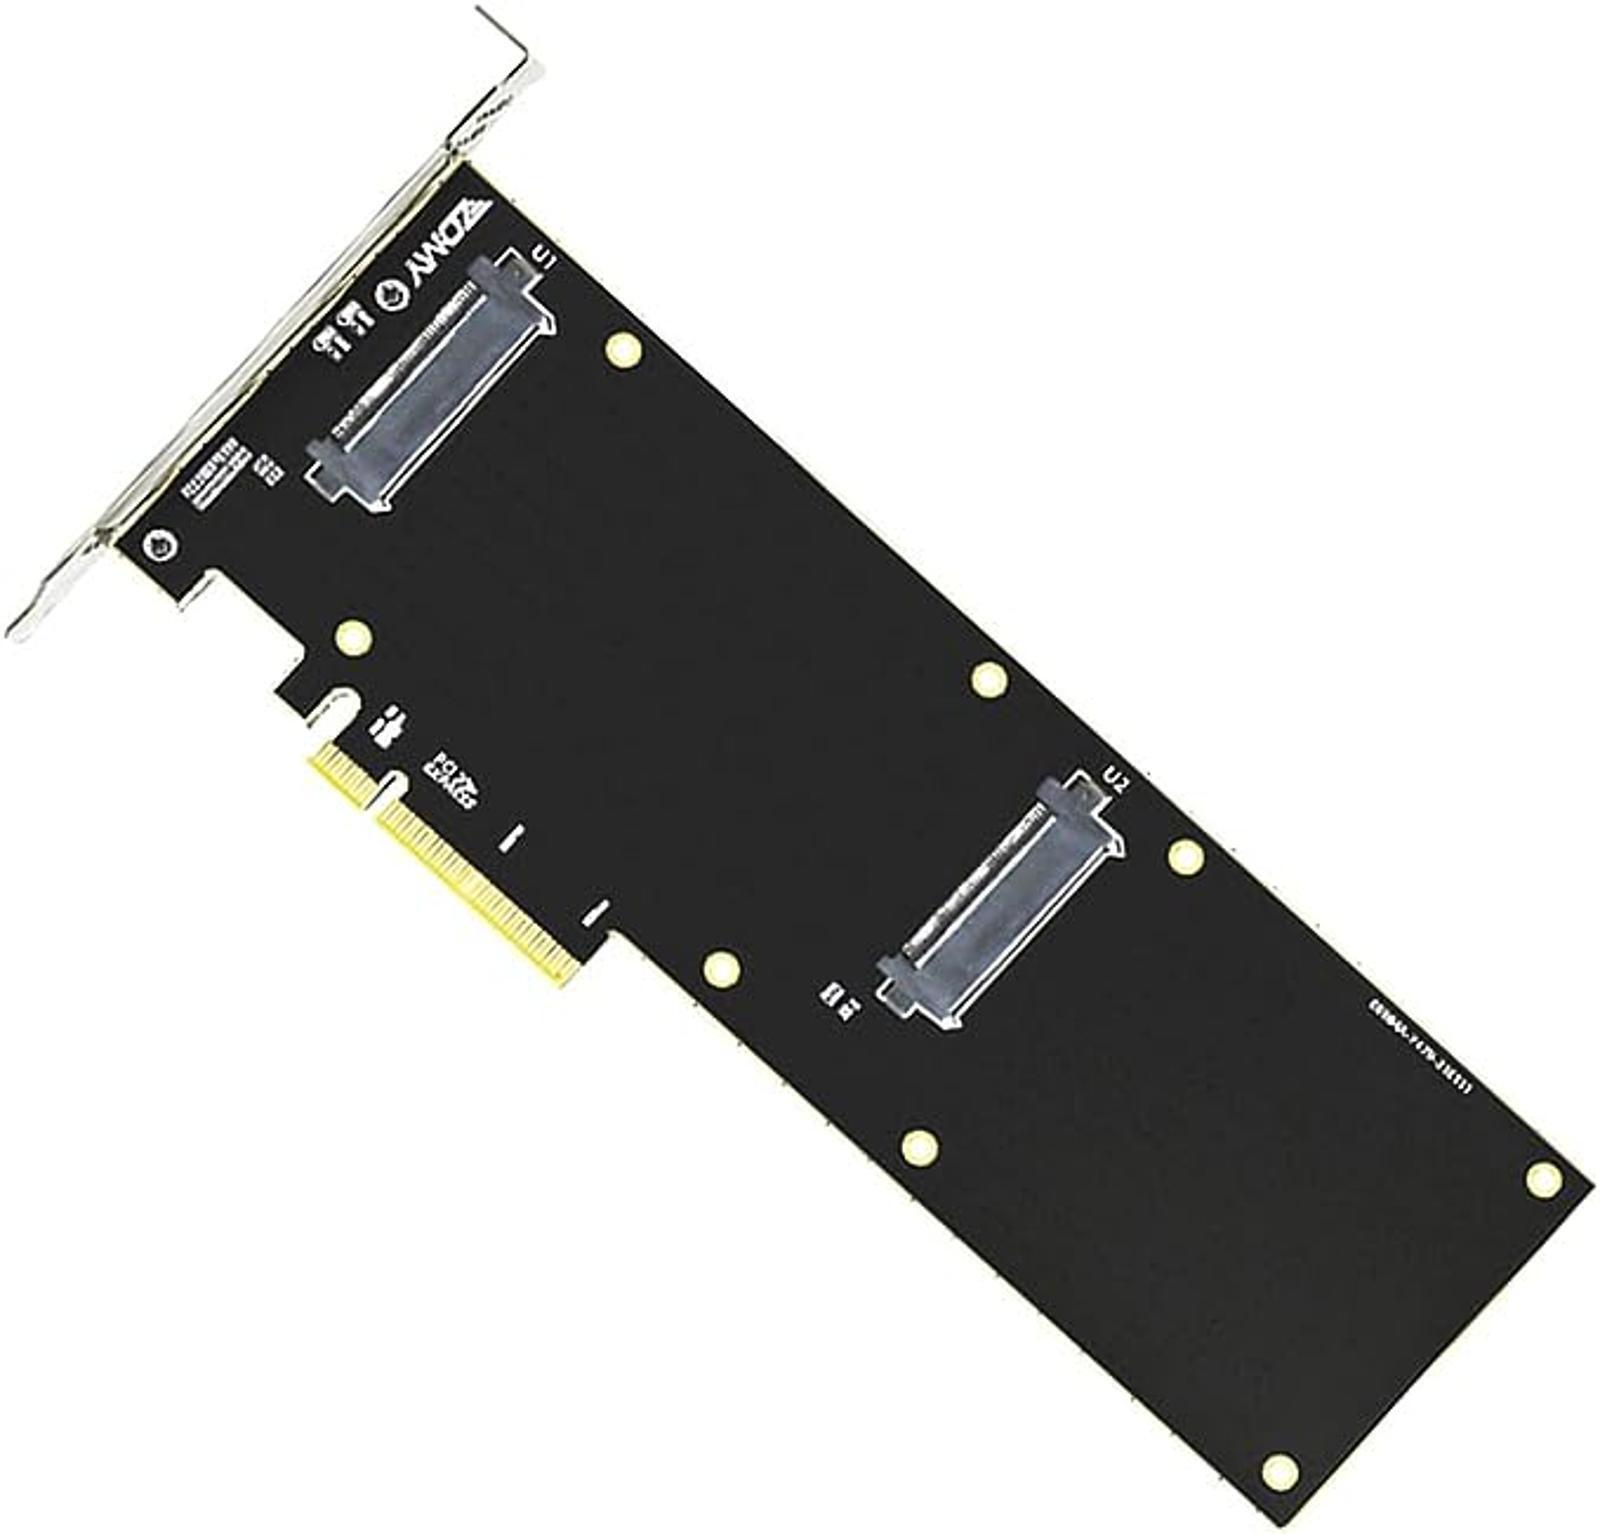 PCIE X8 to U2 Adapter Card For motherboards With X8/X16 card Slot Interfaces